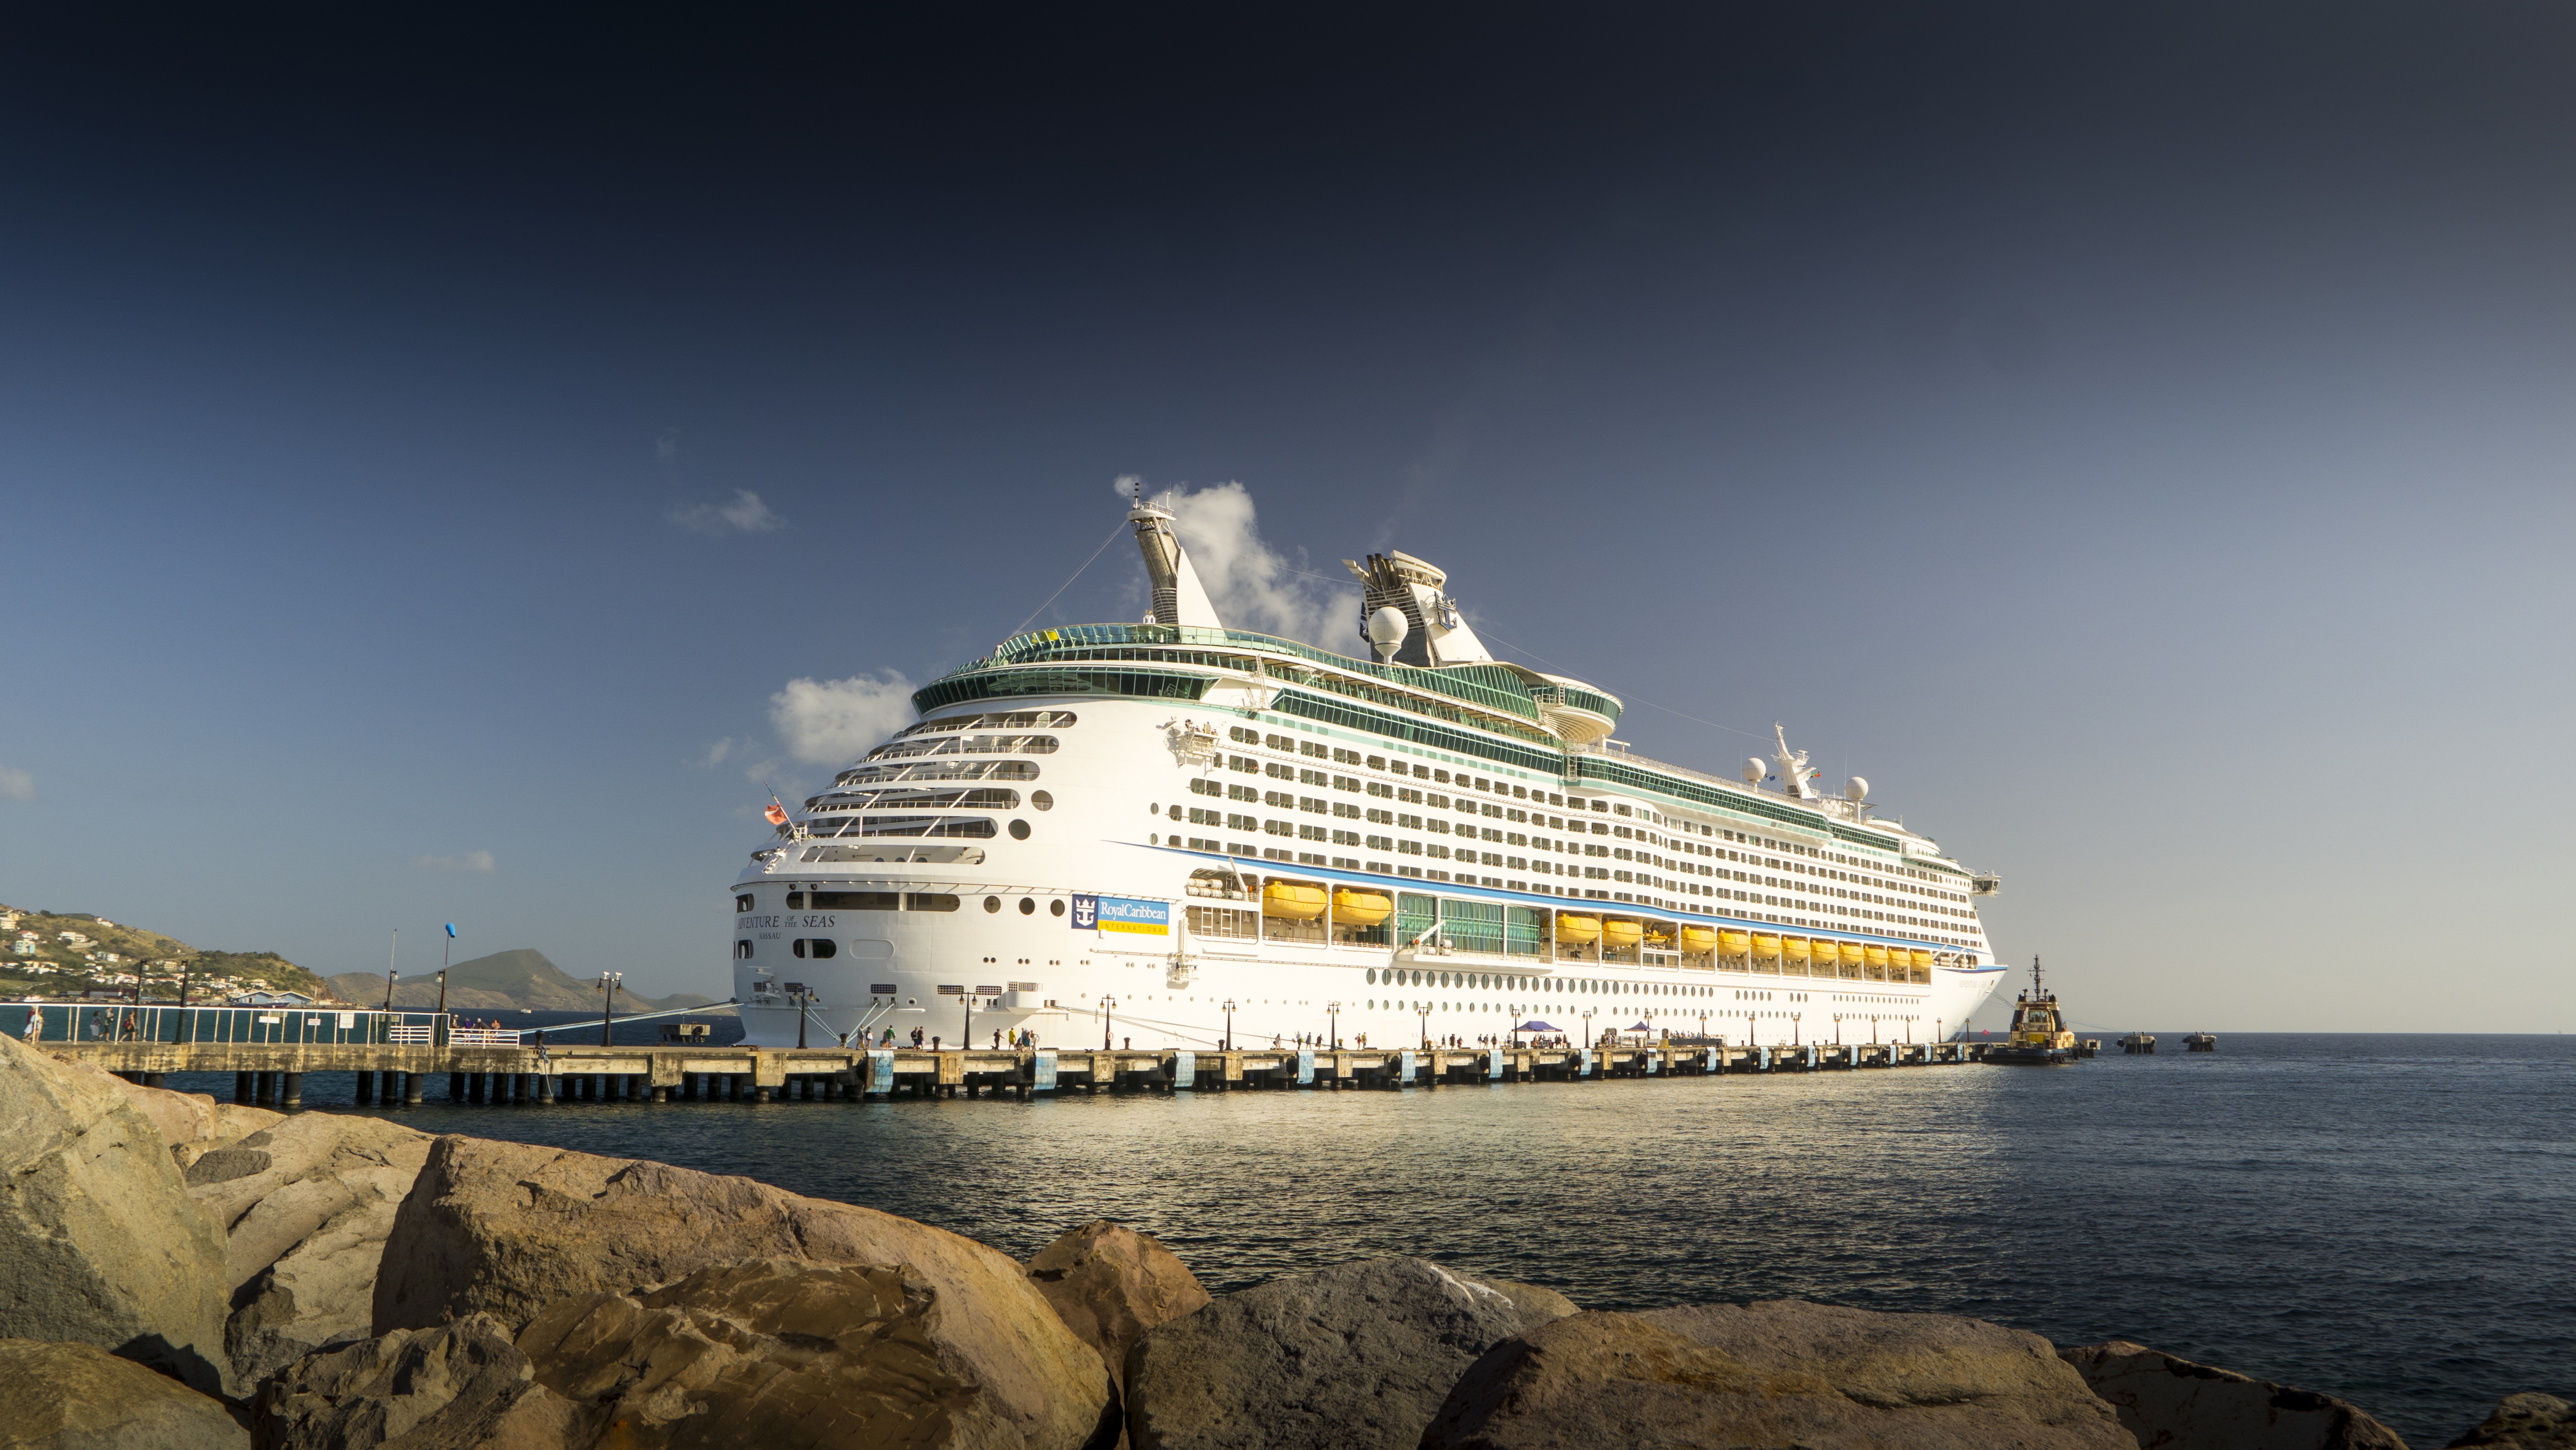 Adventure of the seas in the caribbean by JanSimonMD